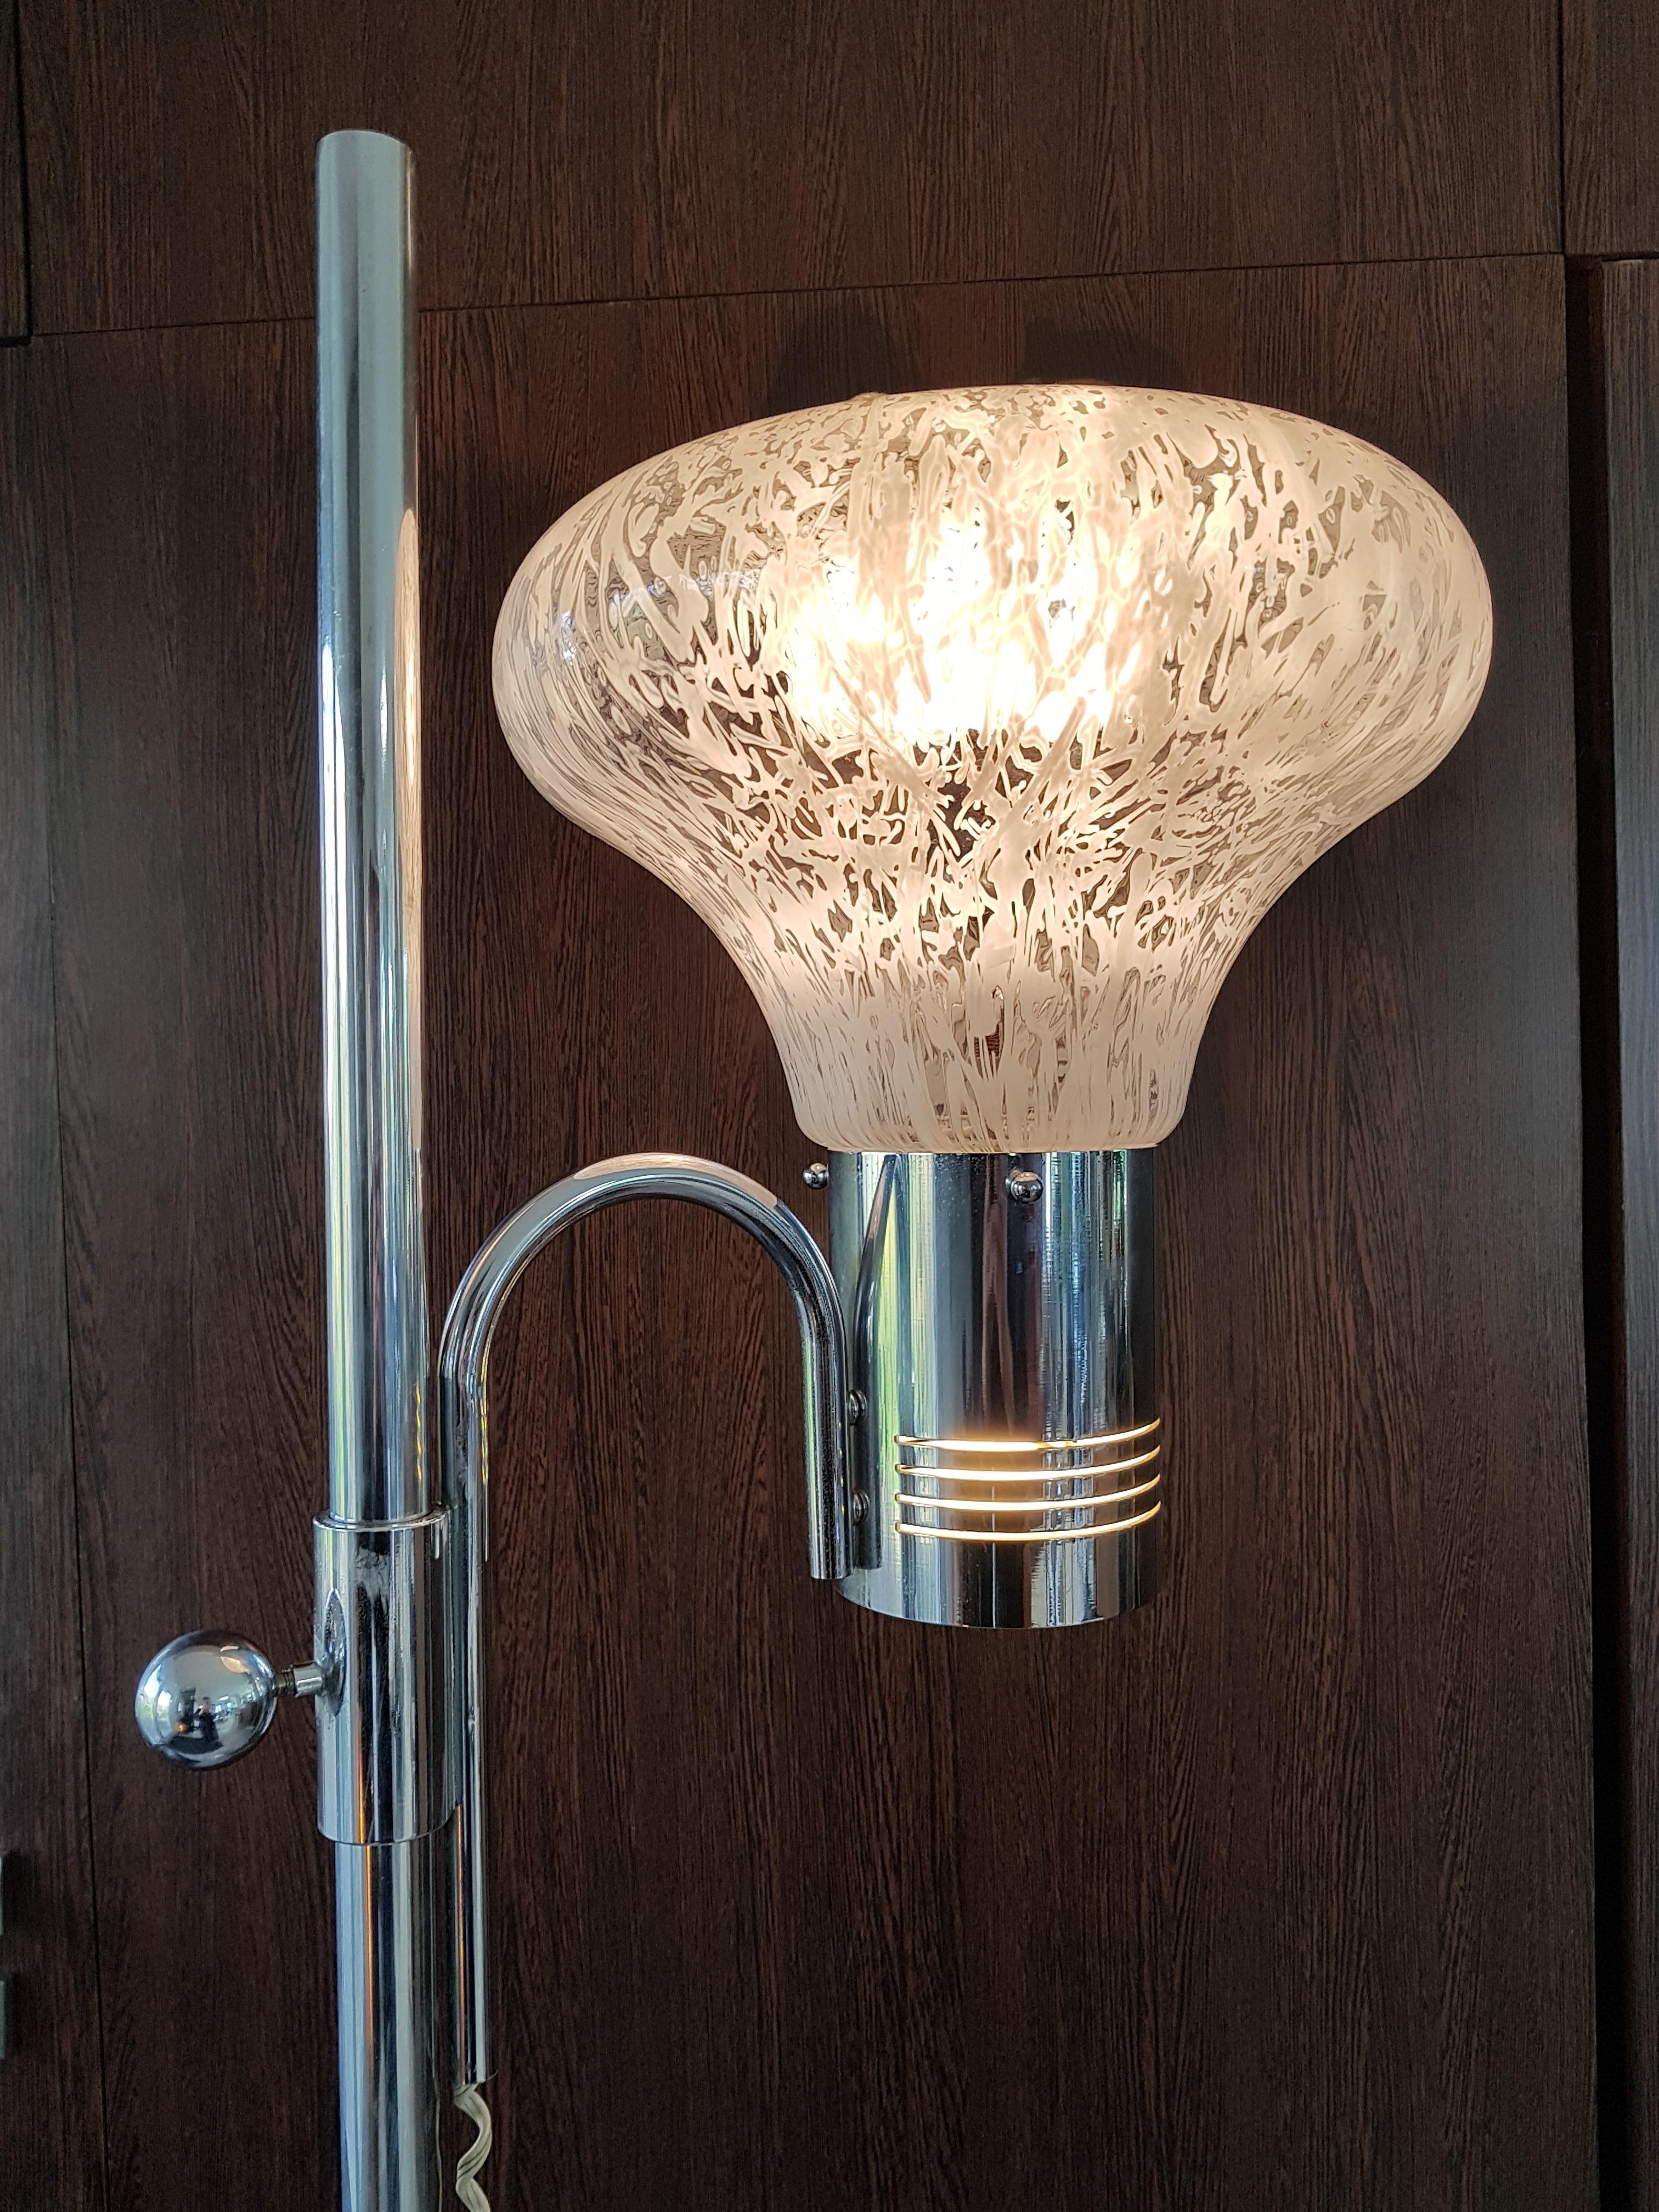 Midcentury Carlo Nason for Mazzega floor lamp, Italy, 1960.
Good vintage condition.
Two bulbs ! one in the shade, one in the mount!